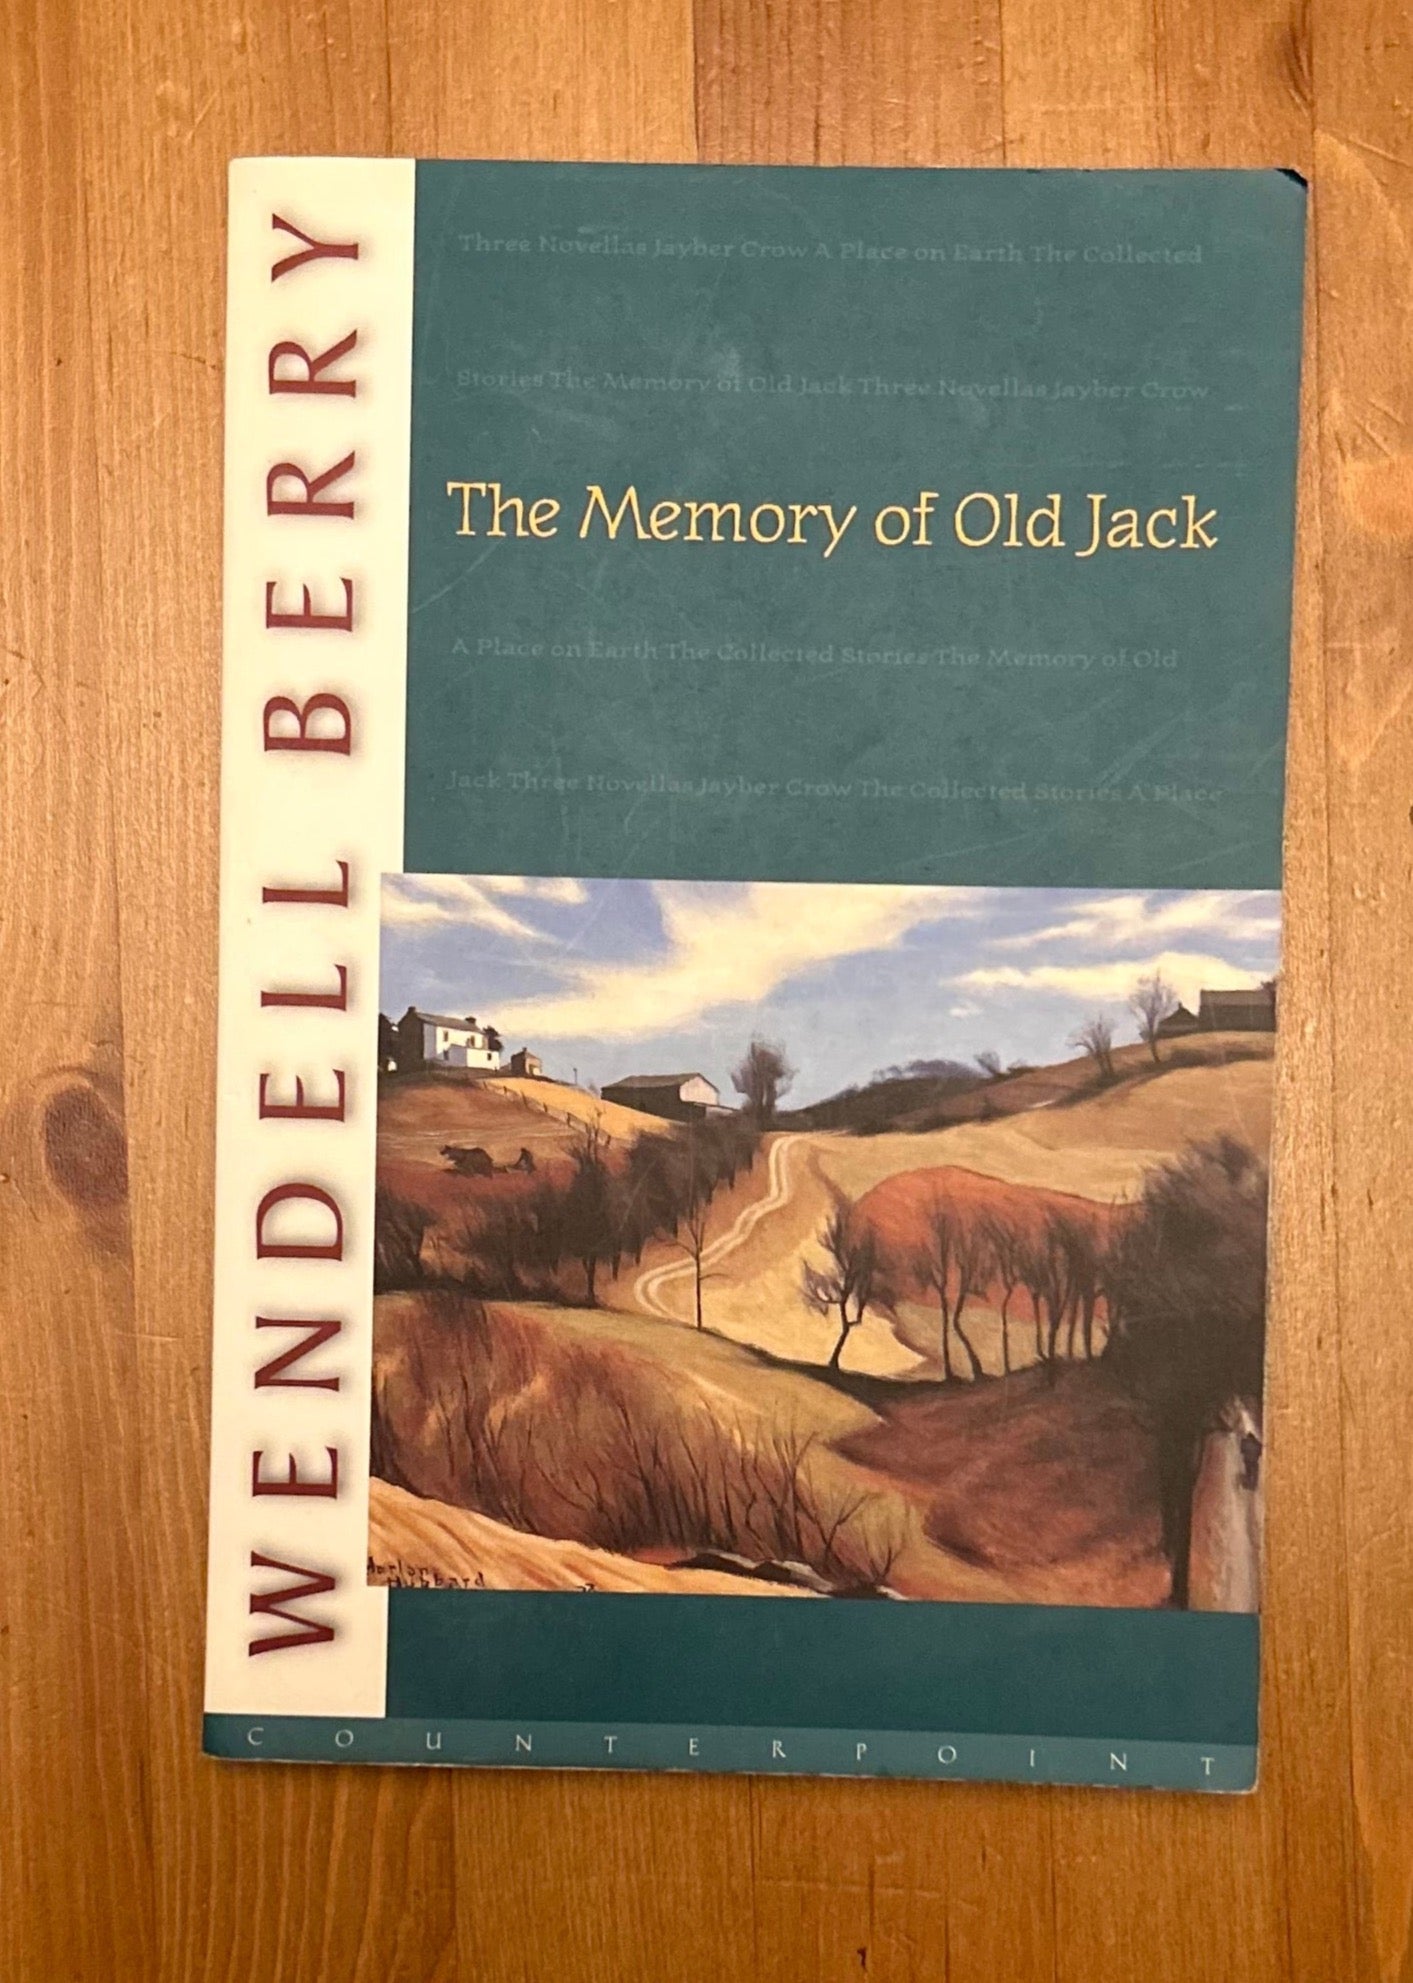 The Memory of Old Jack. Wendell Berry